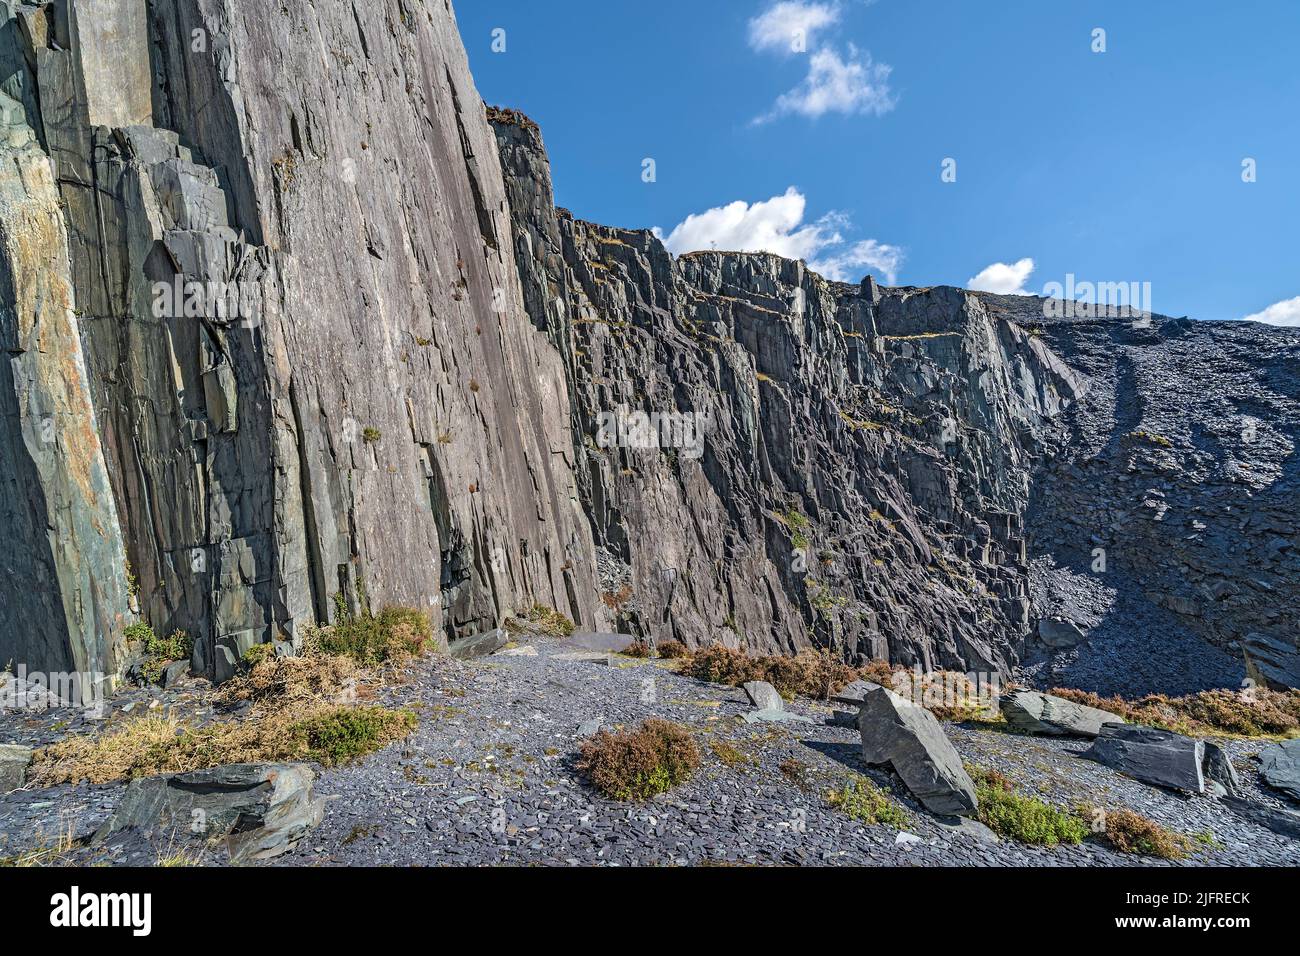 Cliffs formed from slate quarrying in the disused Dinorwic Slate quarry near Llanberis North Wales UK September 2020 Stock Photo